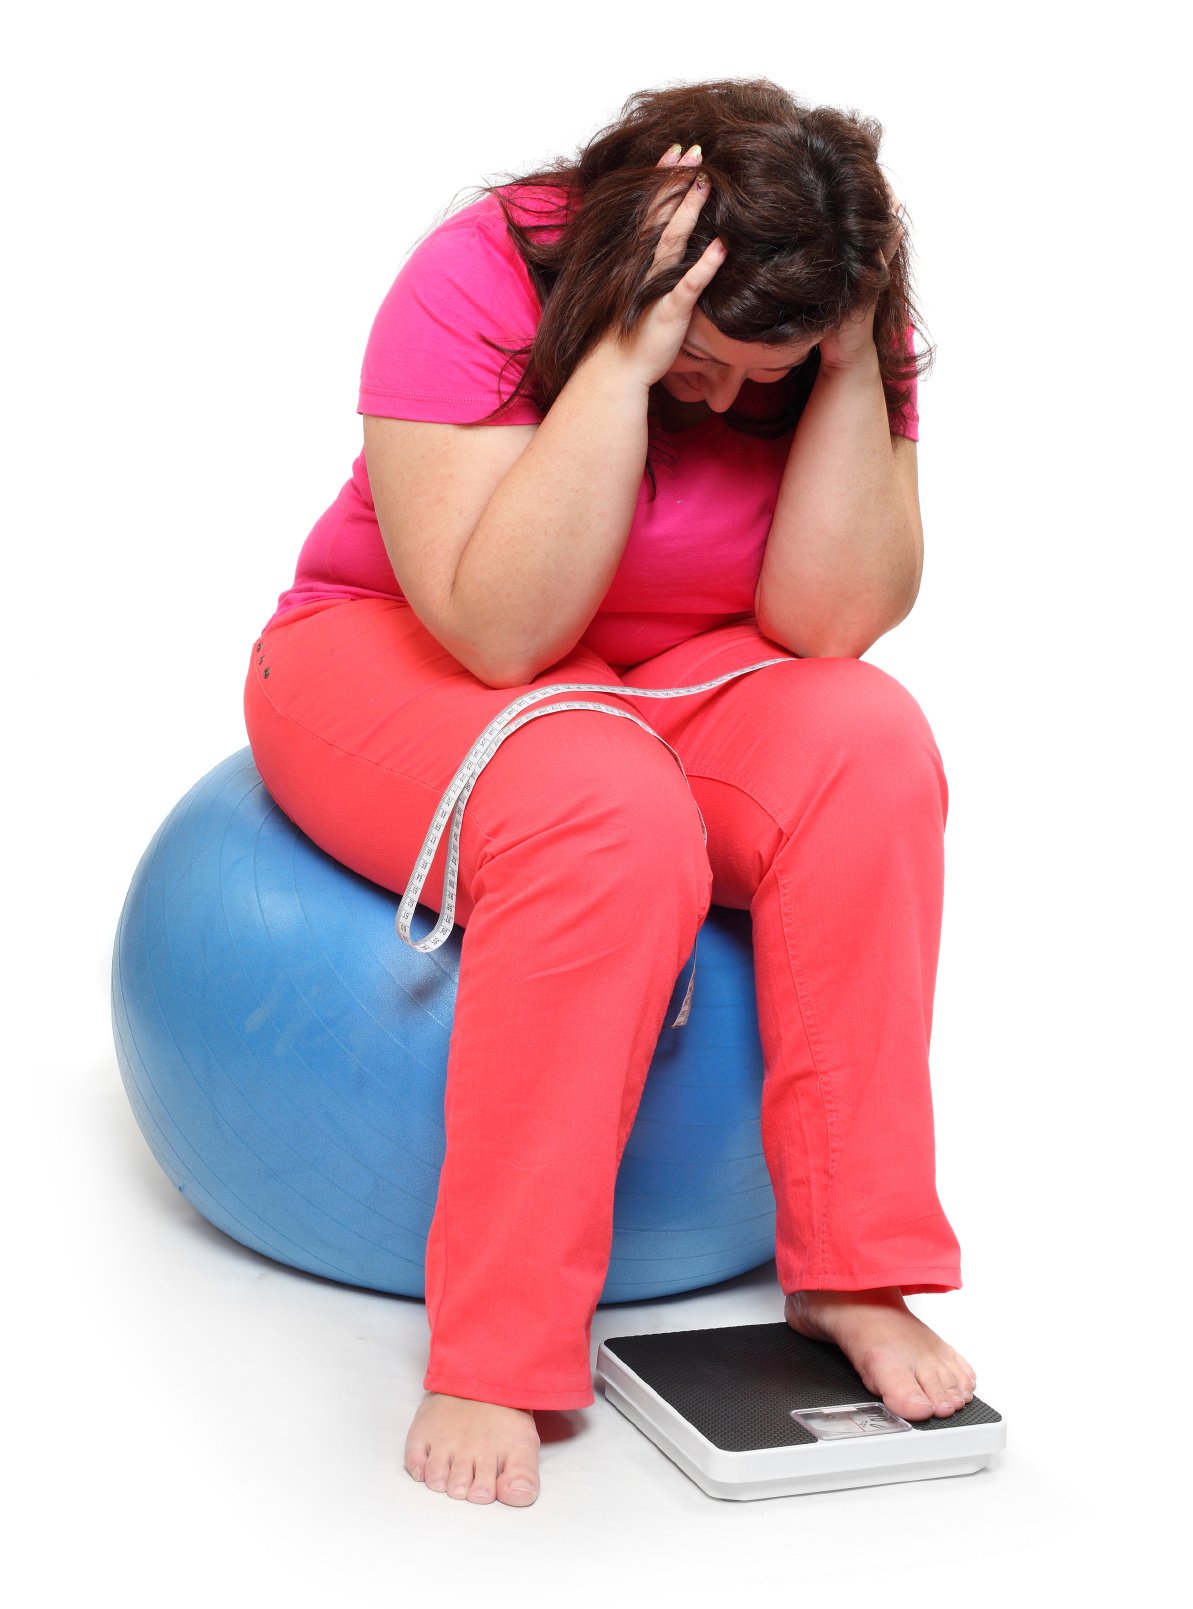 Frustrated overweight woman